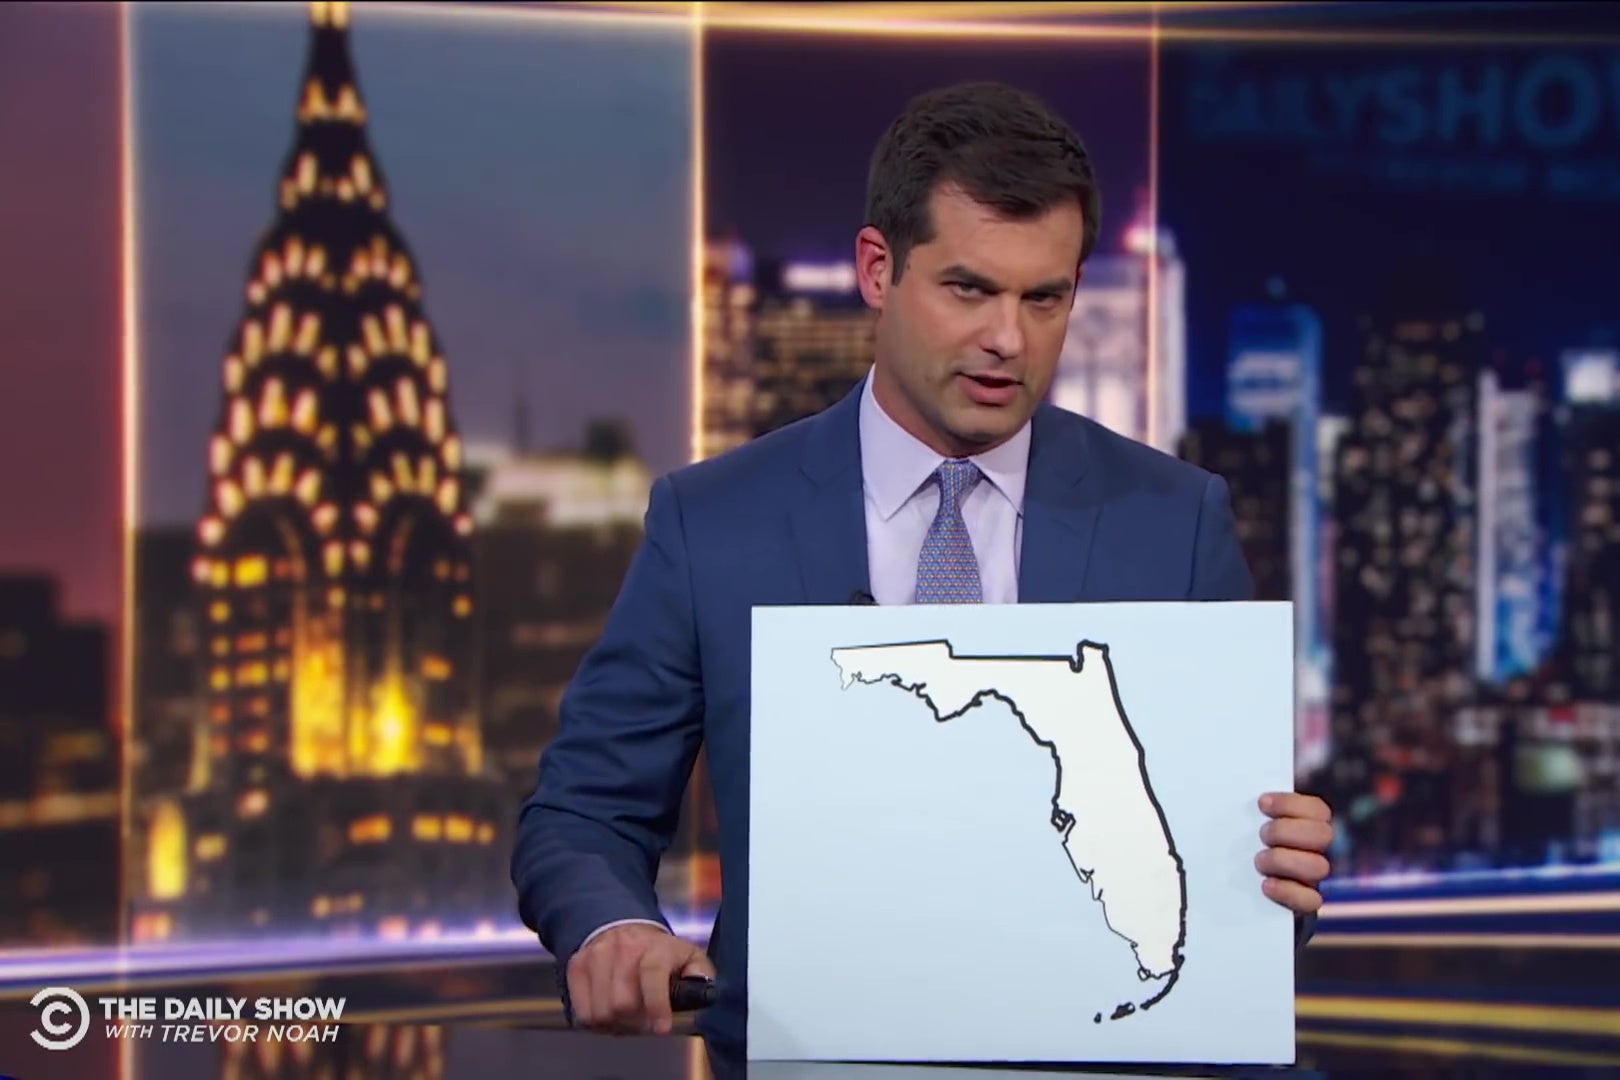 Michael Kosta holds a map of Florida.